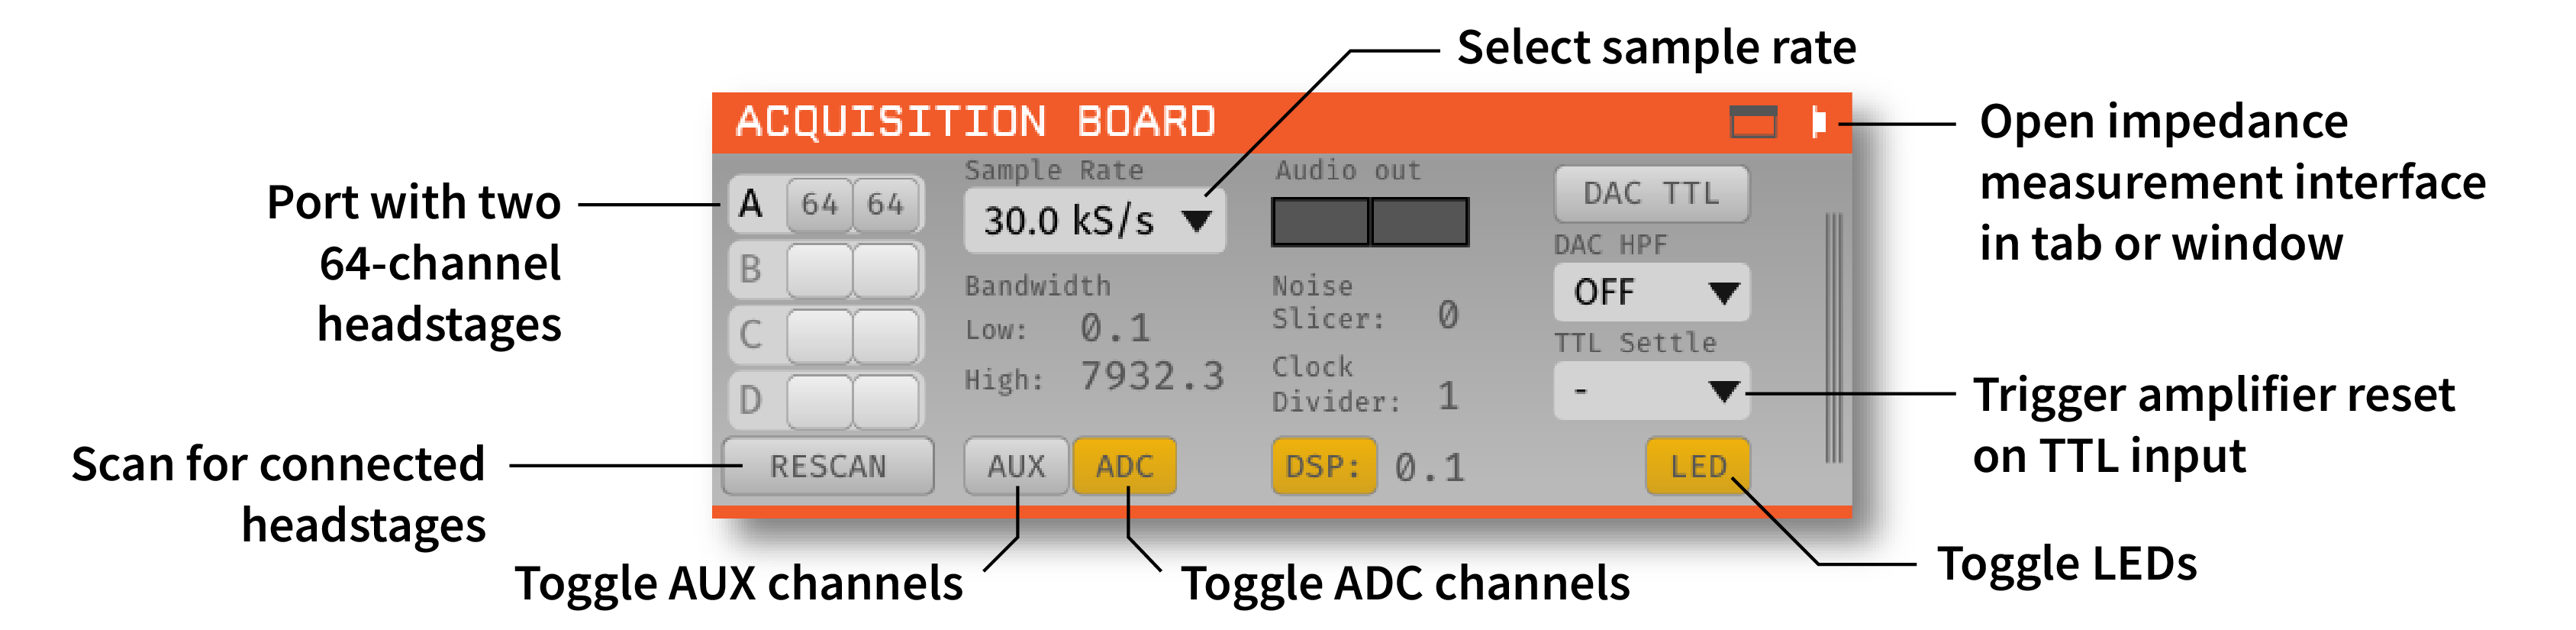 Annotated settings interface for the Acquisition Board plugin